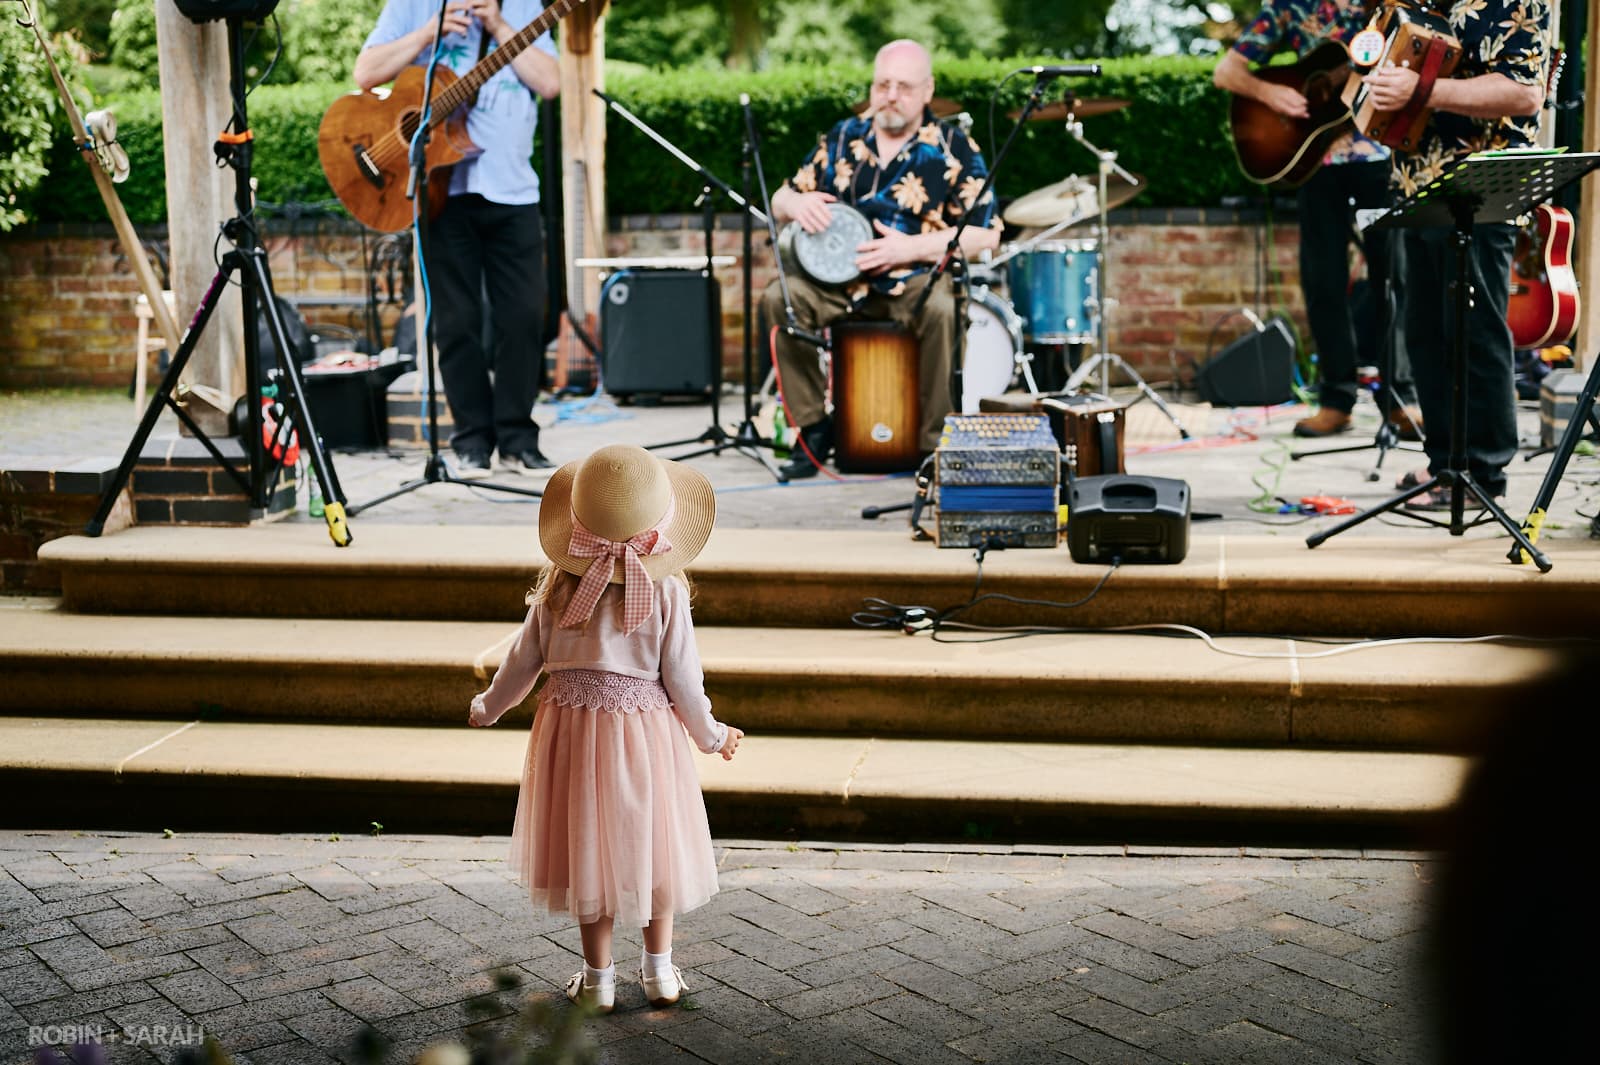 Young girl watches musicians play at wedding reception